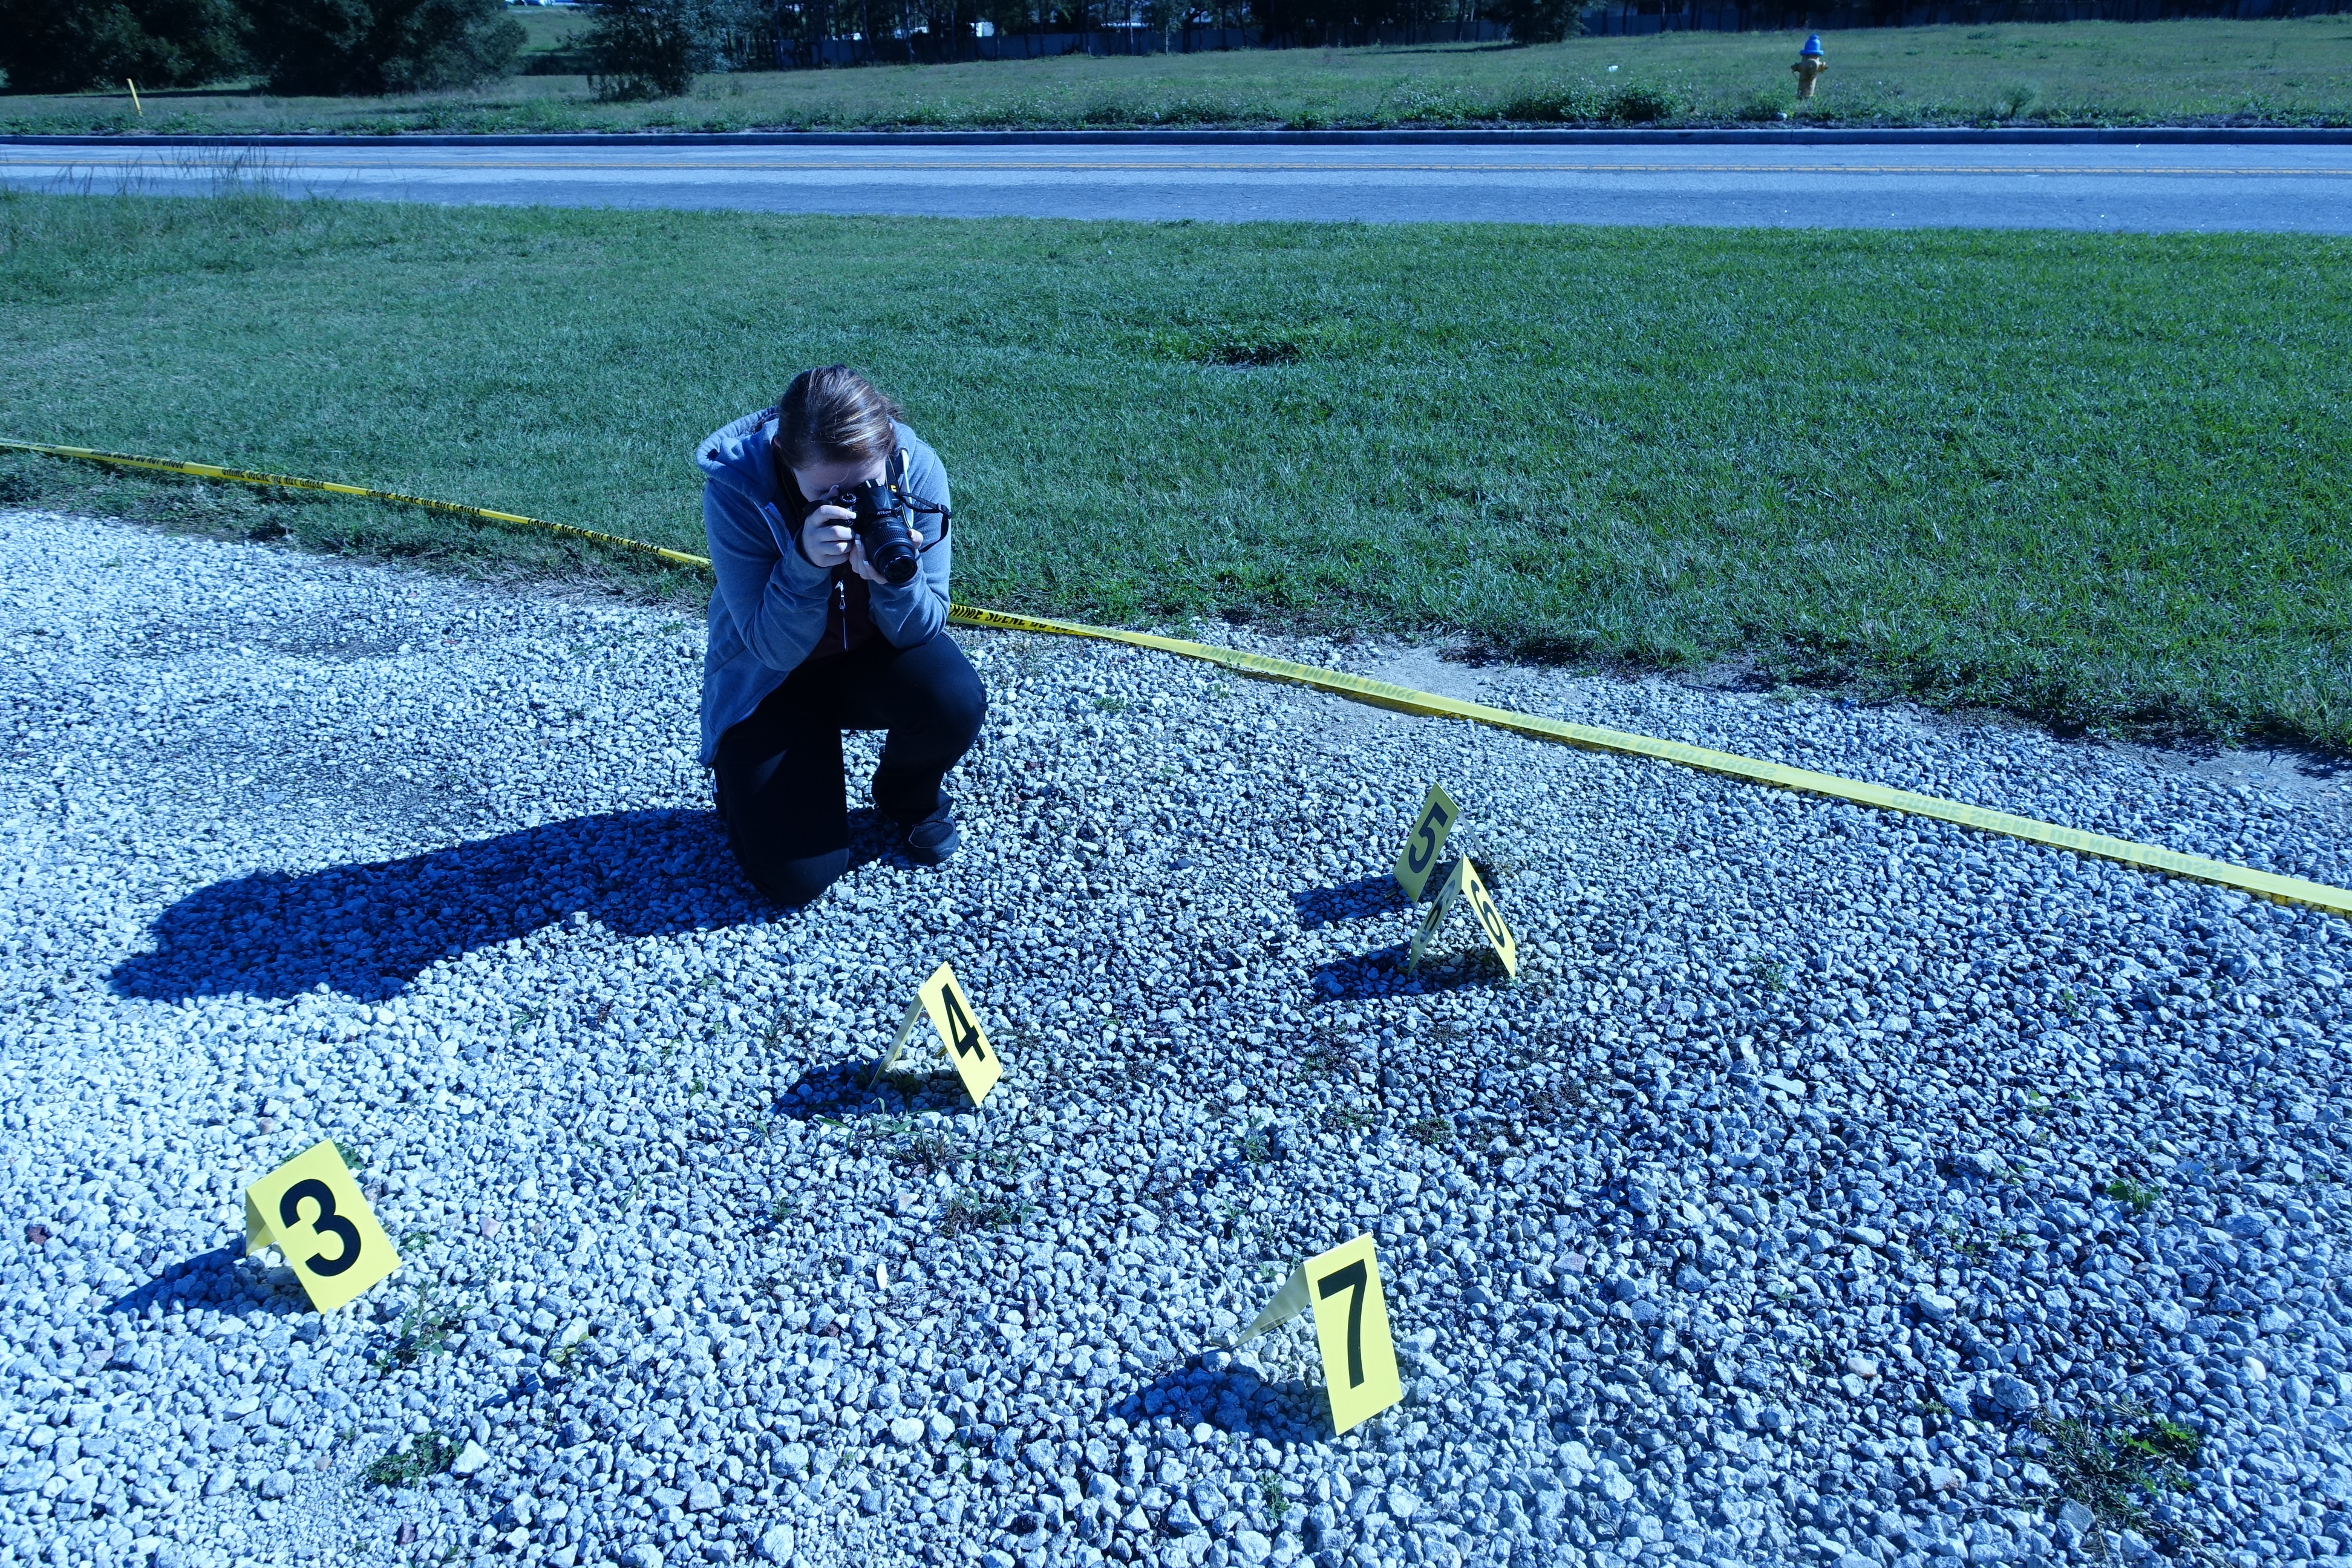 Forensic Investigation Students in Lakeland Work a “Crime Scene”